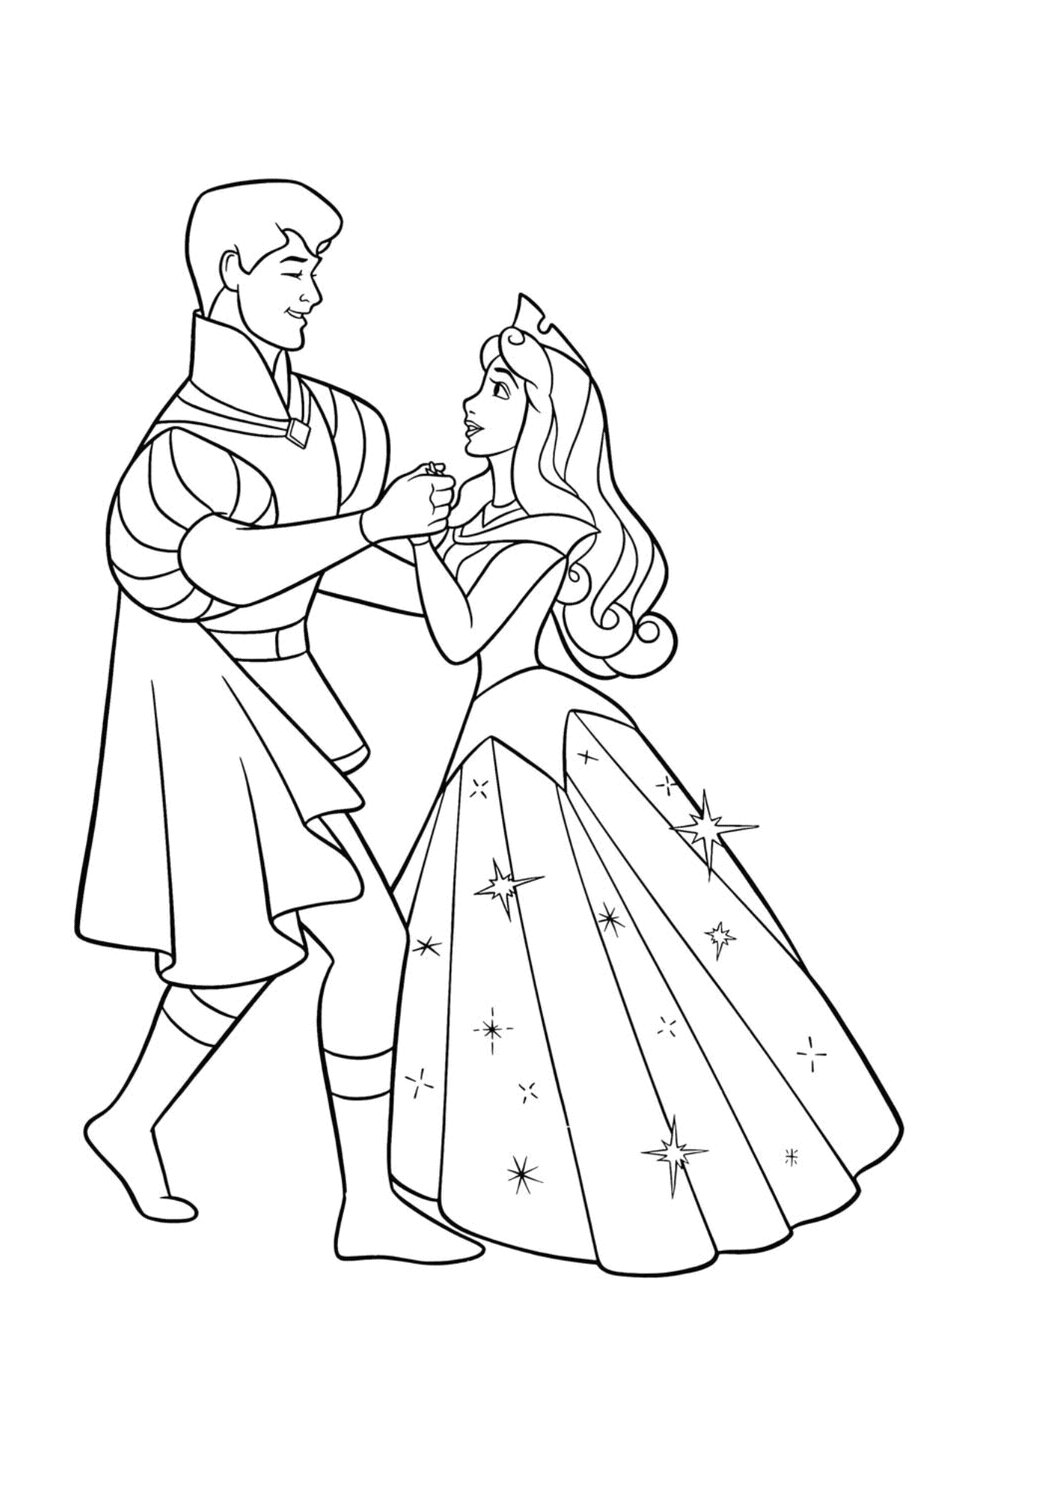 The Princess and the Prince coloring book to print and online Neu